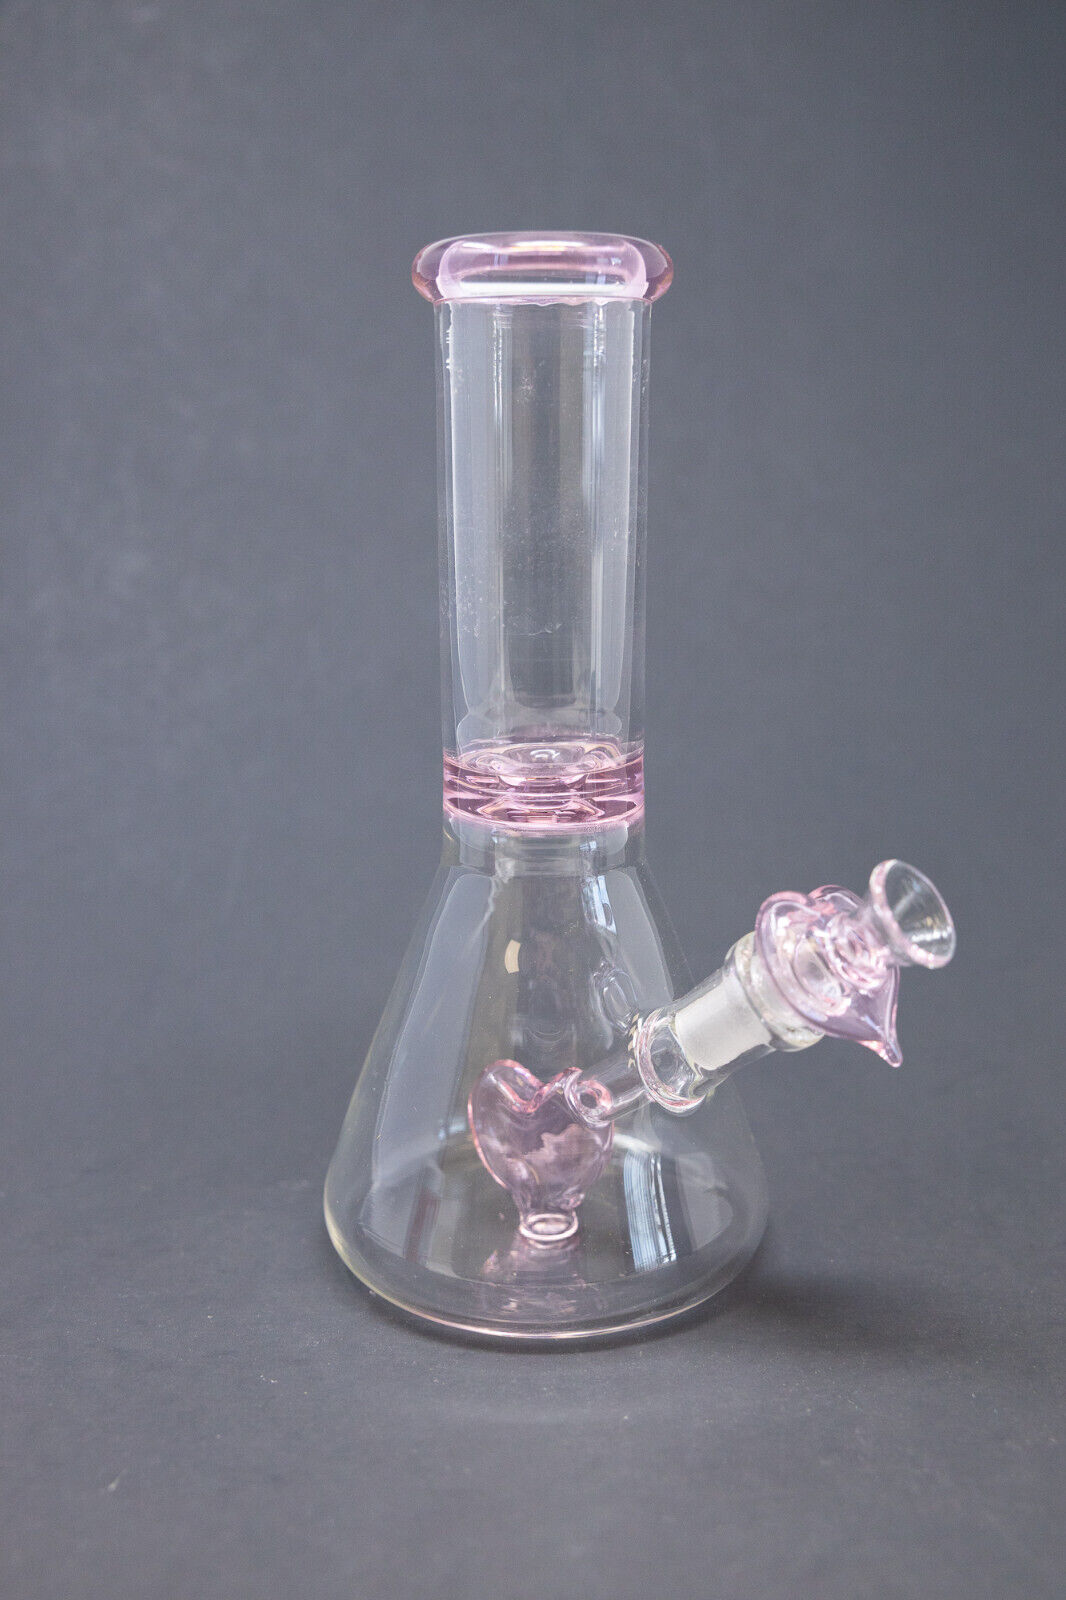 Hookah Water Pipe Glass 8 Heart Tobacco Beaker Bong w/ Heart Bowl Pc Fast Ship. Available Now for 29.99